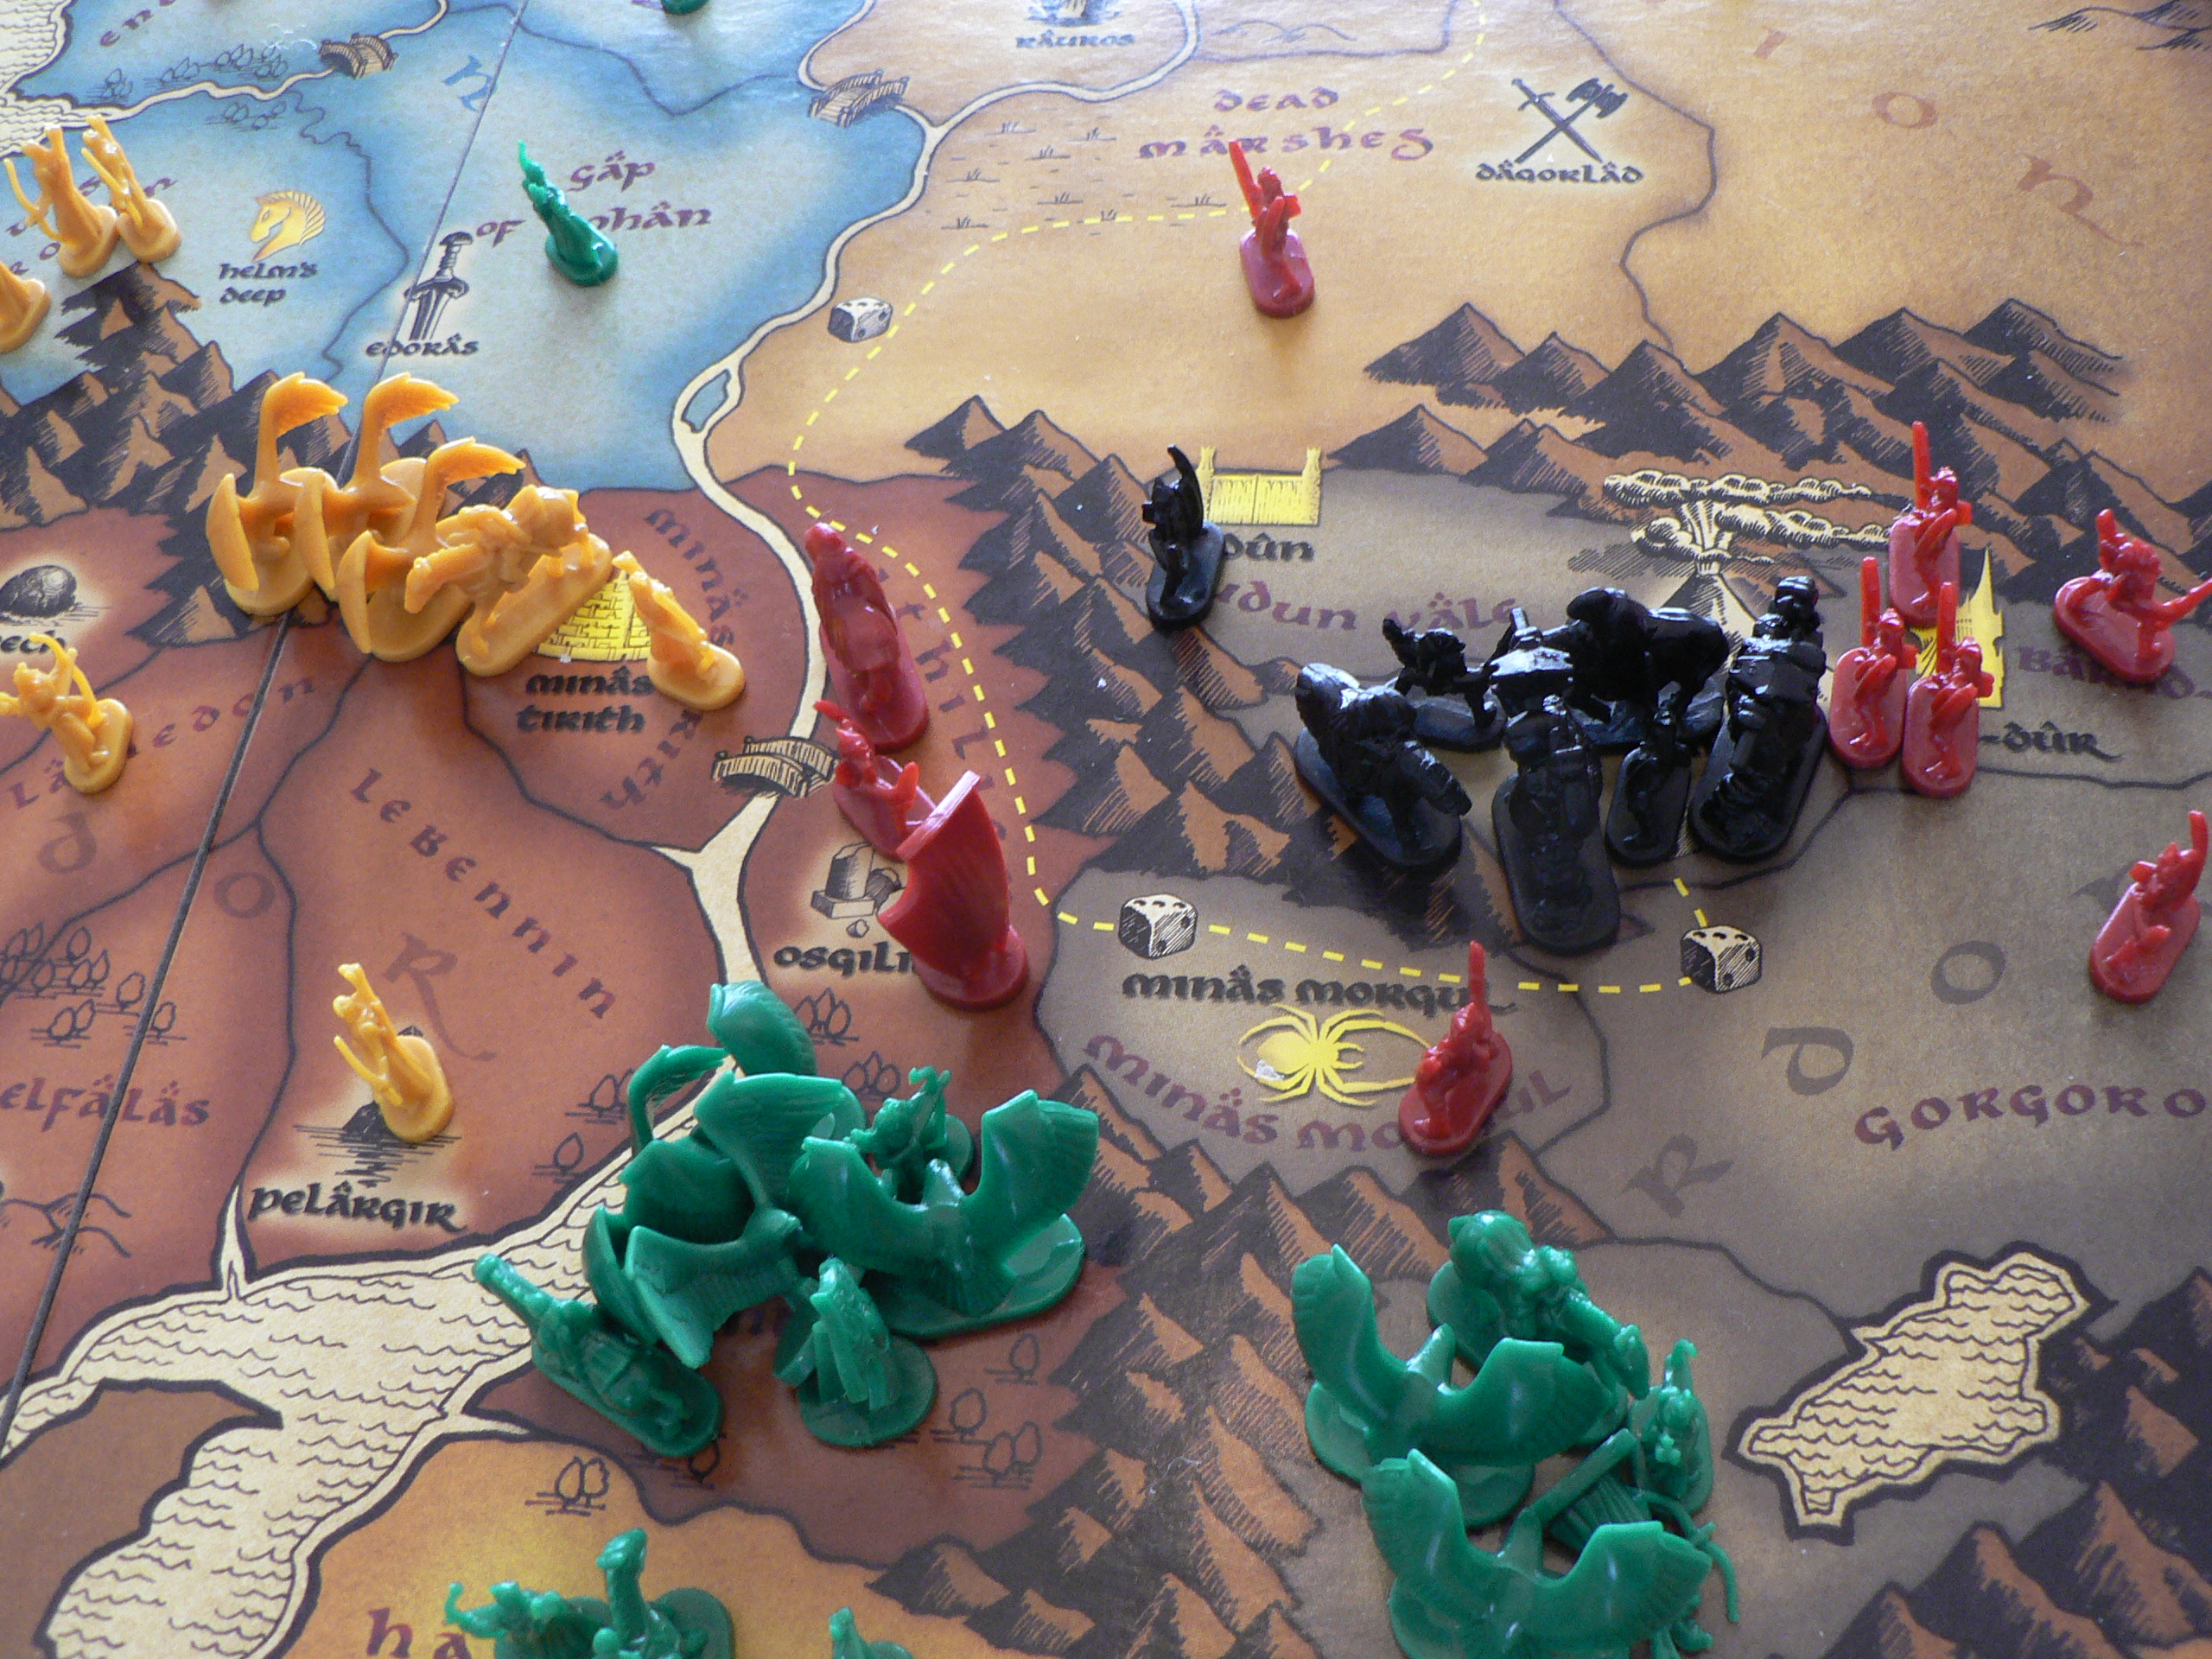 bijstand Hedendaags slecht RISK: The Lord of the Rings Trilogy Edition • RISK Game Reviews